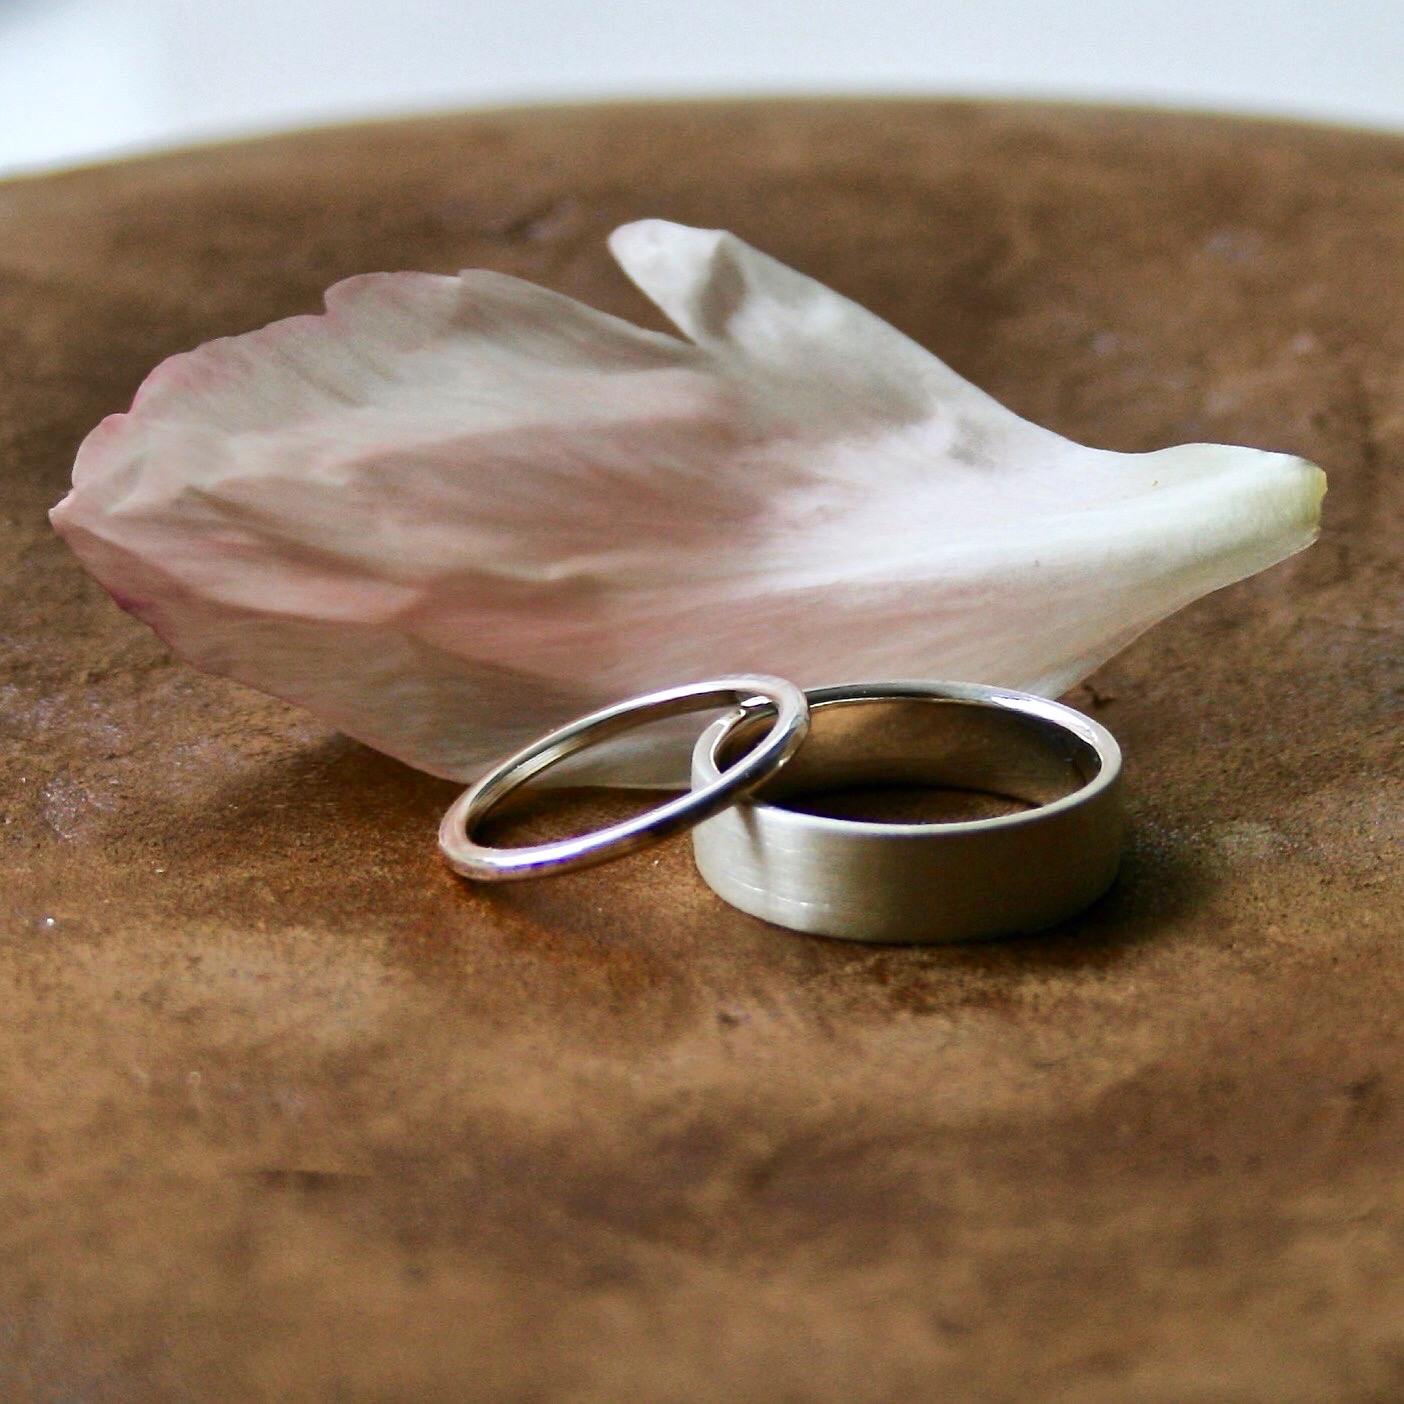 Make your own wedding rings silver gold ring handcrafted wedding bristol jewellery workshop â flux